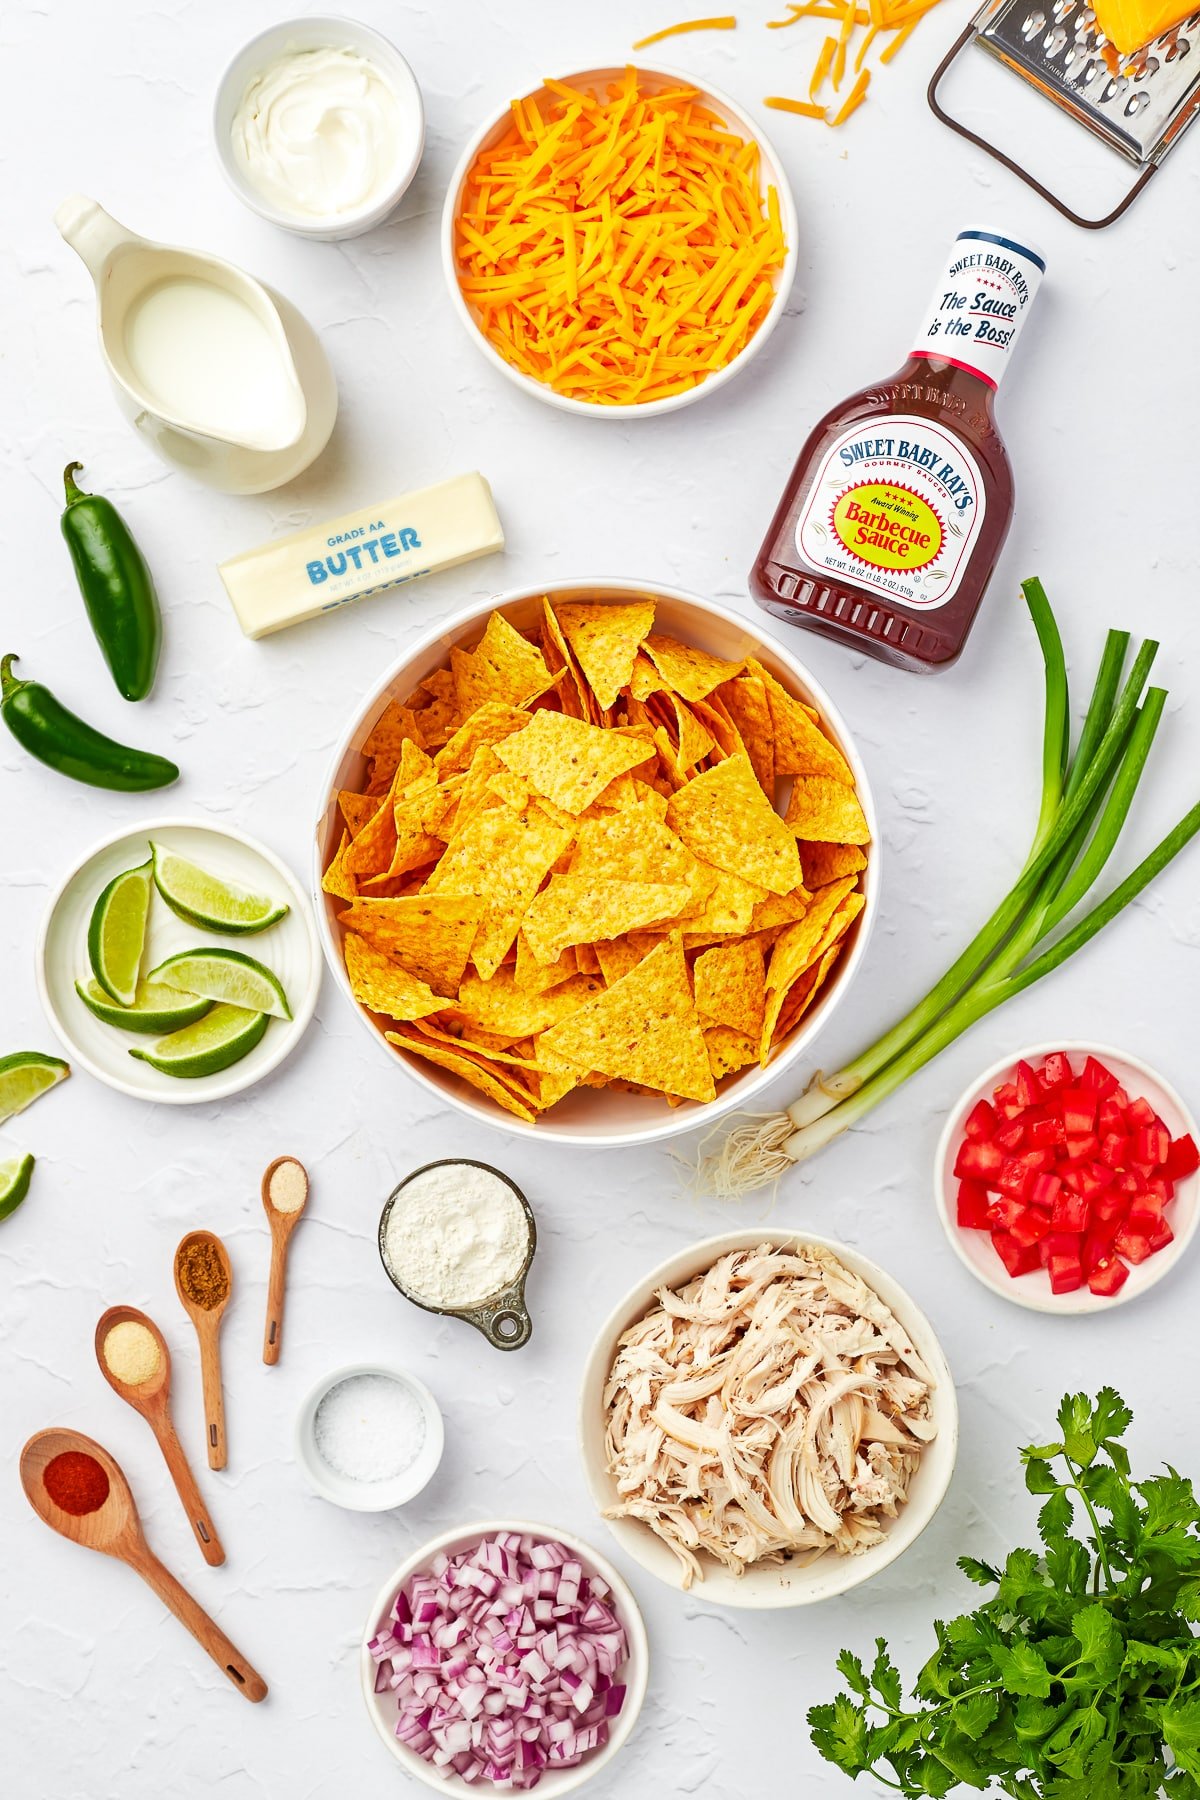 Overhead shot of the ingredients needed to make BBQ Chicken Nachos shown on a white stucco table top